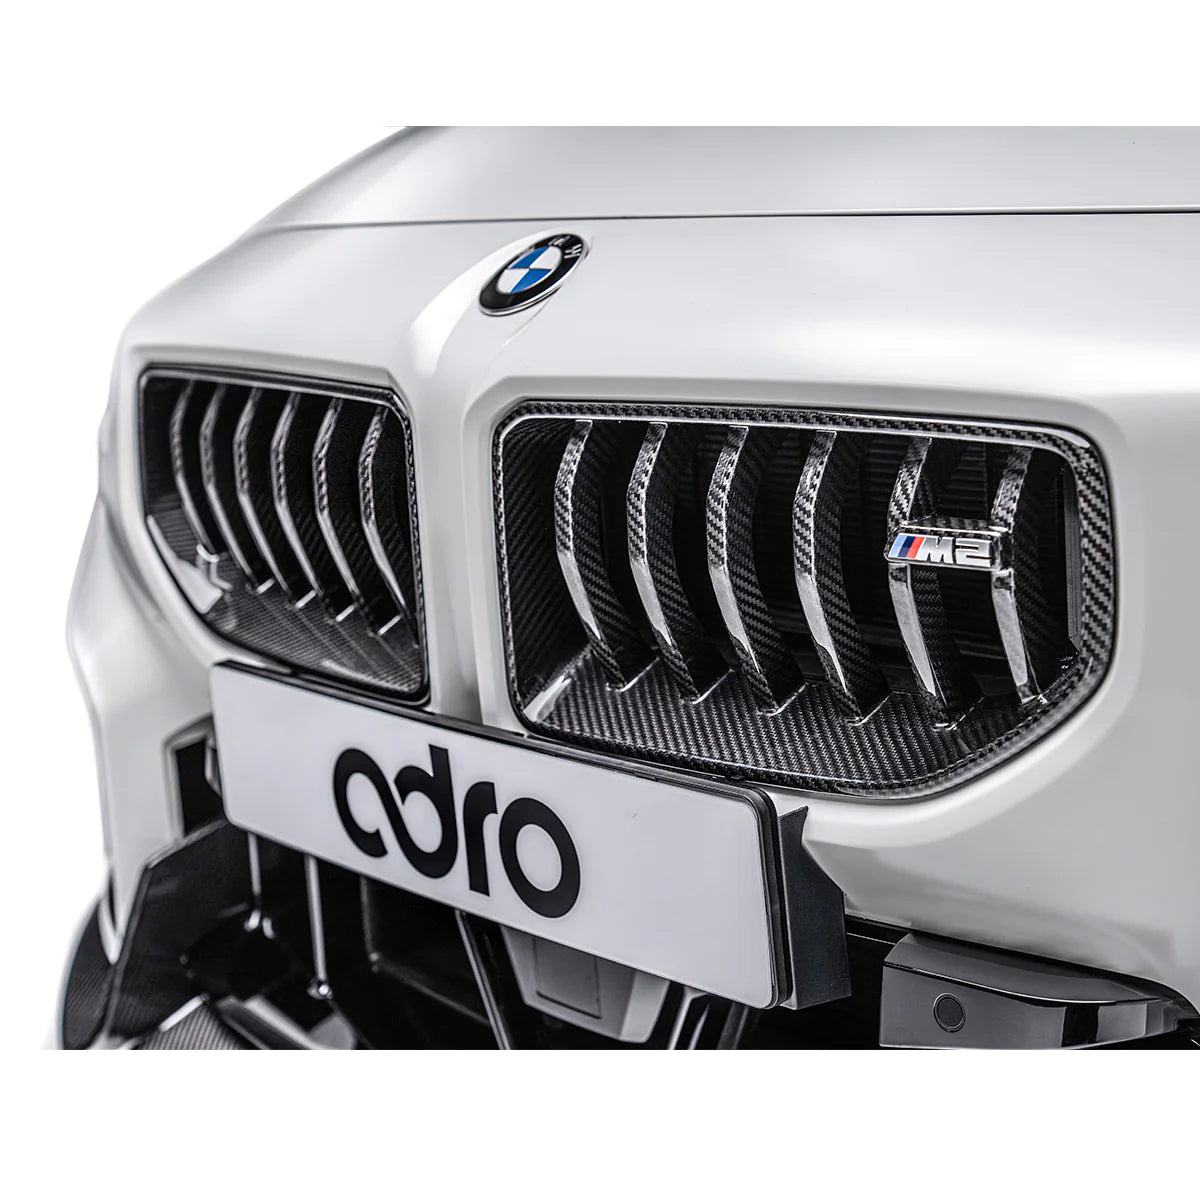 ADRO BMW G87 M2 FRONT GRILLE - PREORDER NOW!